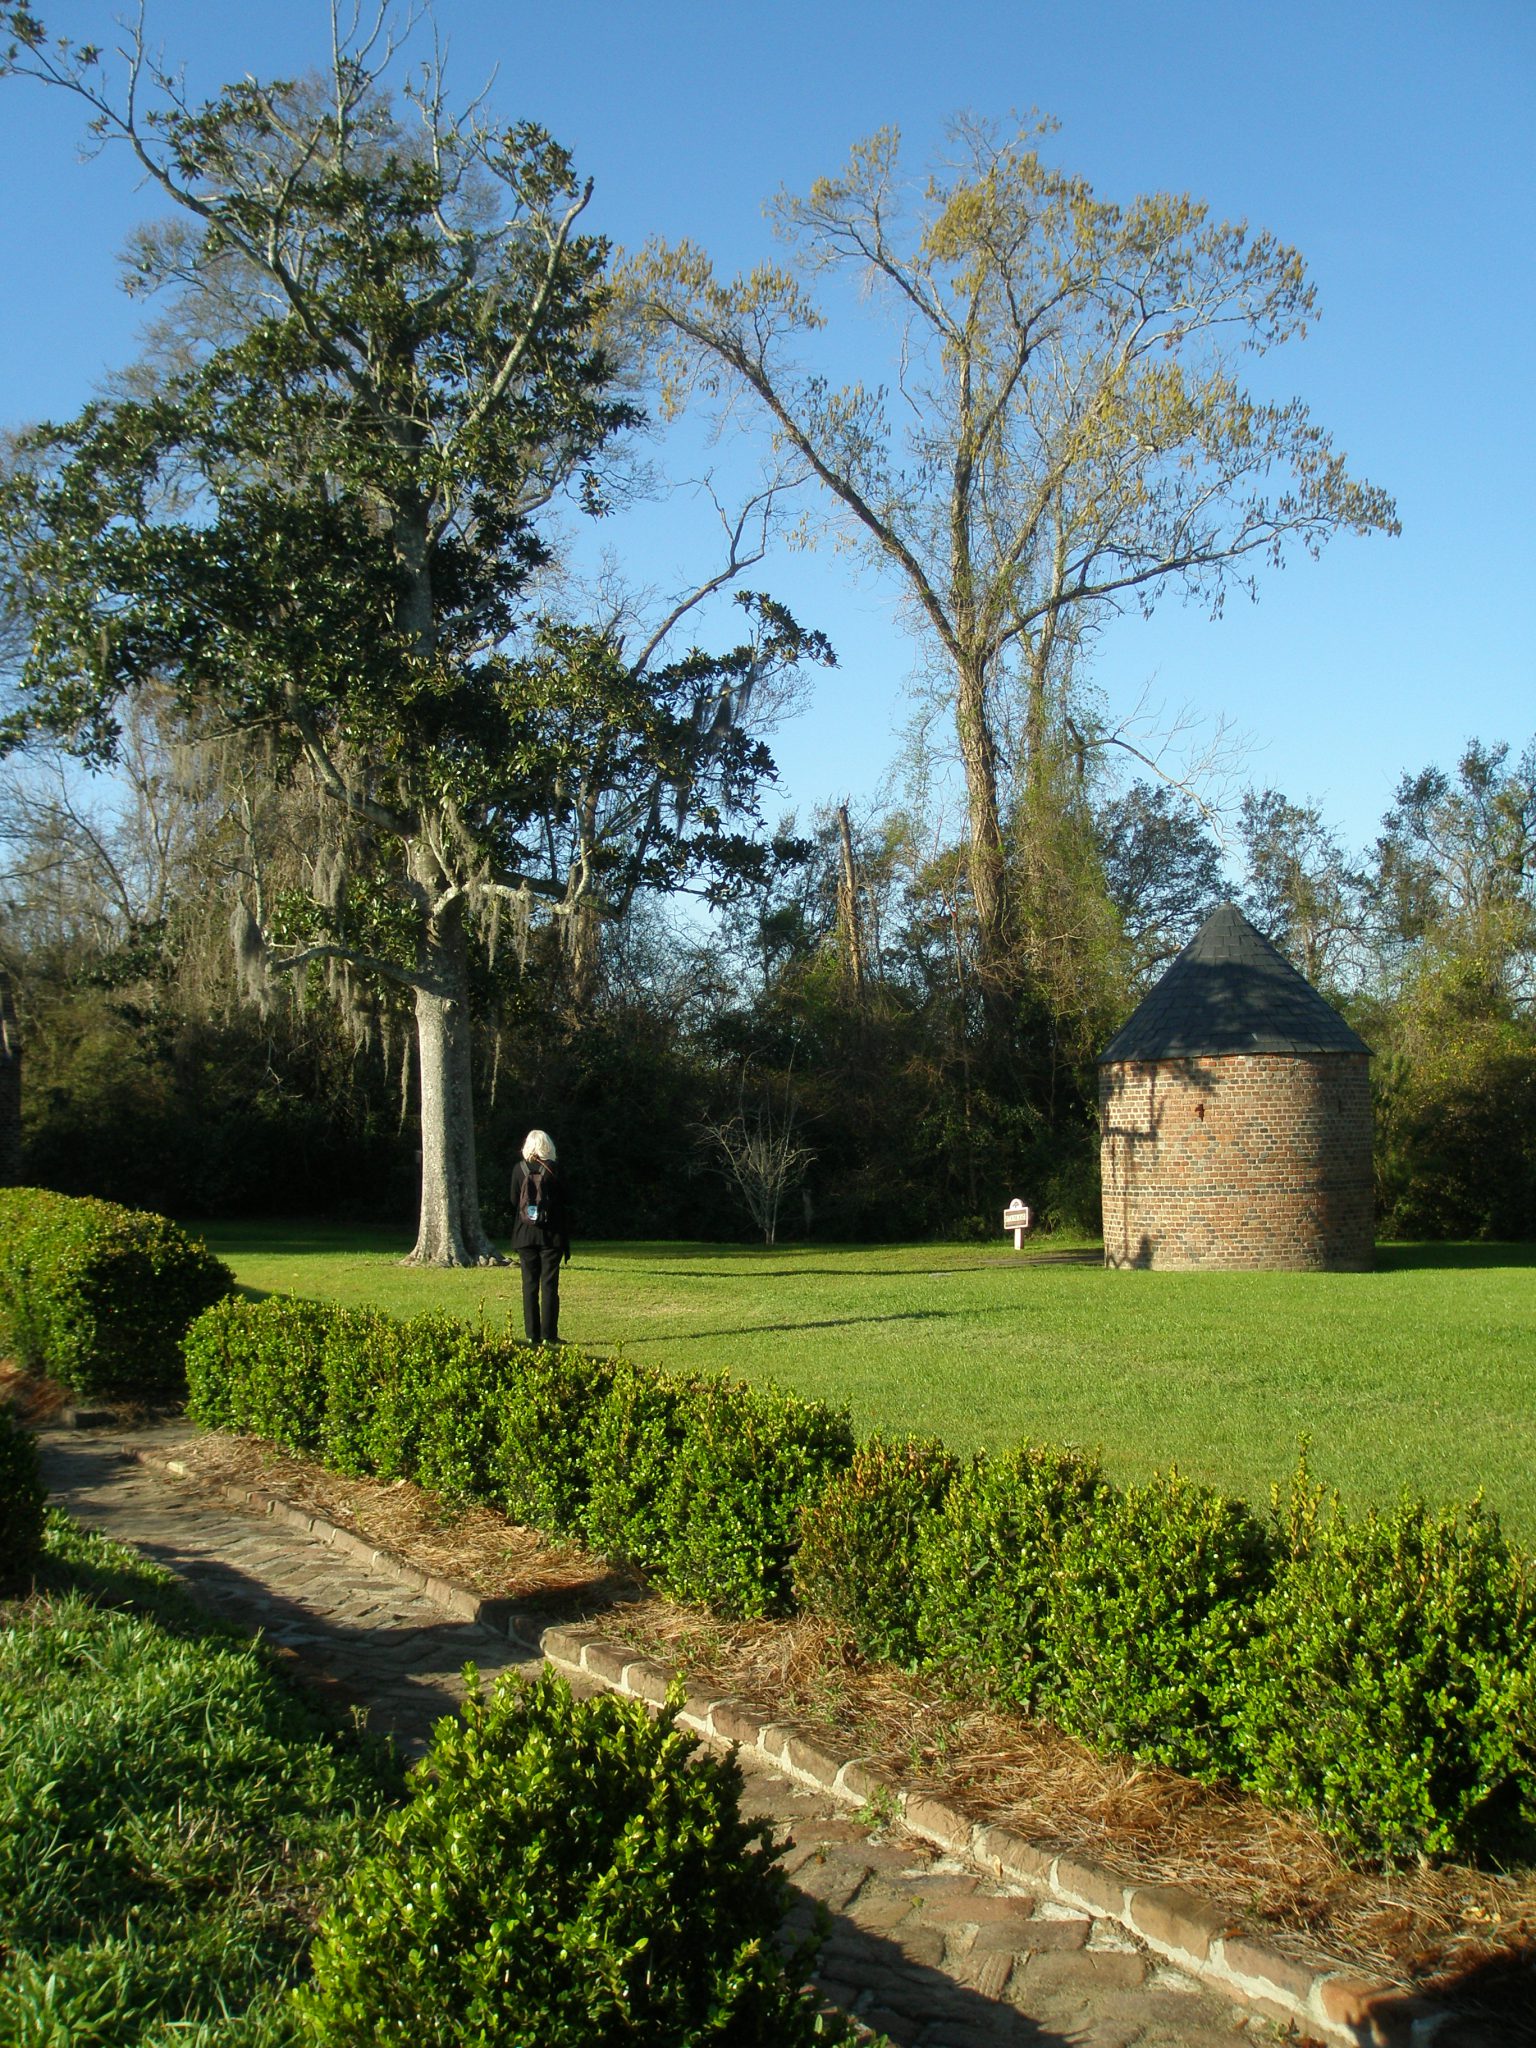 Donn inspects the Smoke House, which is the oldest structure at the Plantation